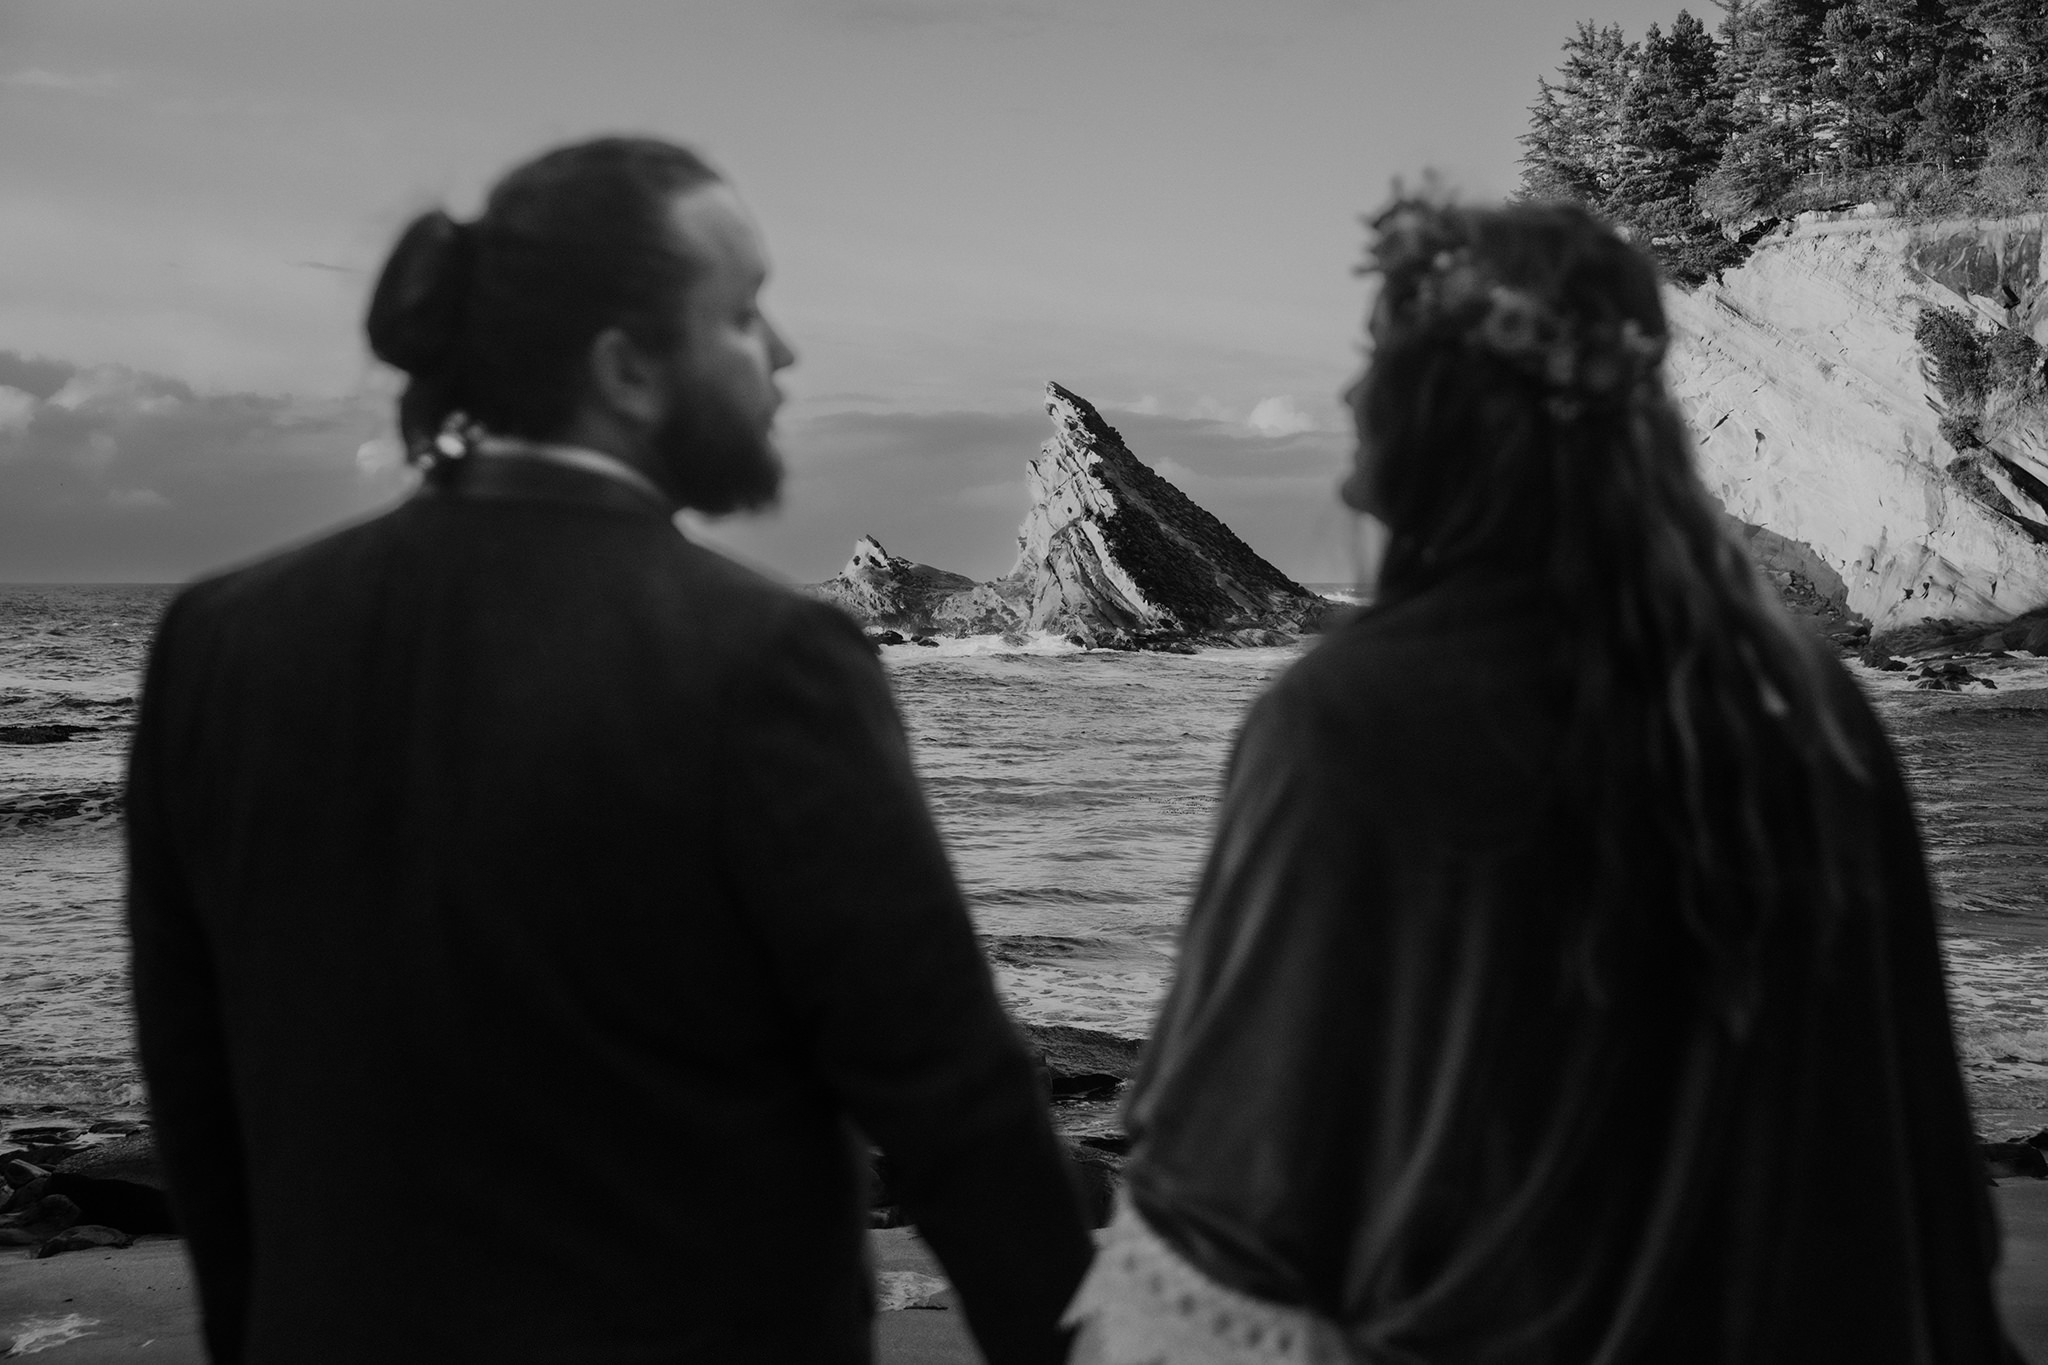 A moody wedding photo of a bride and groom with the jagged Oregon coastline in the background